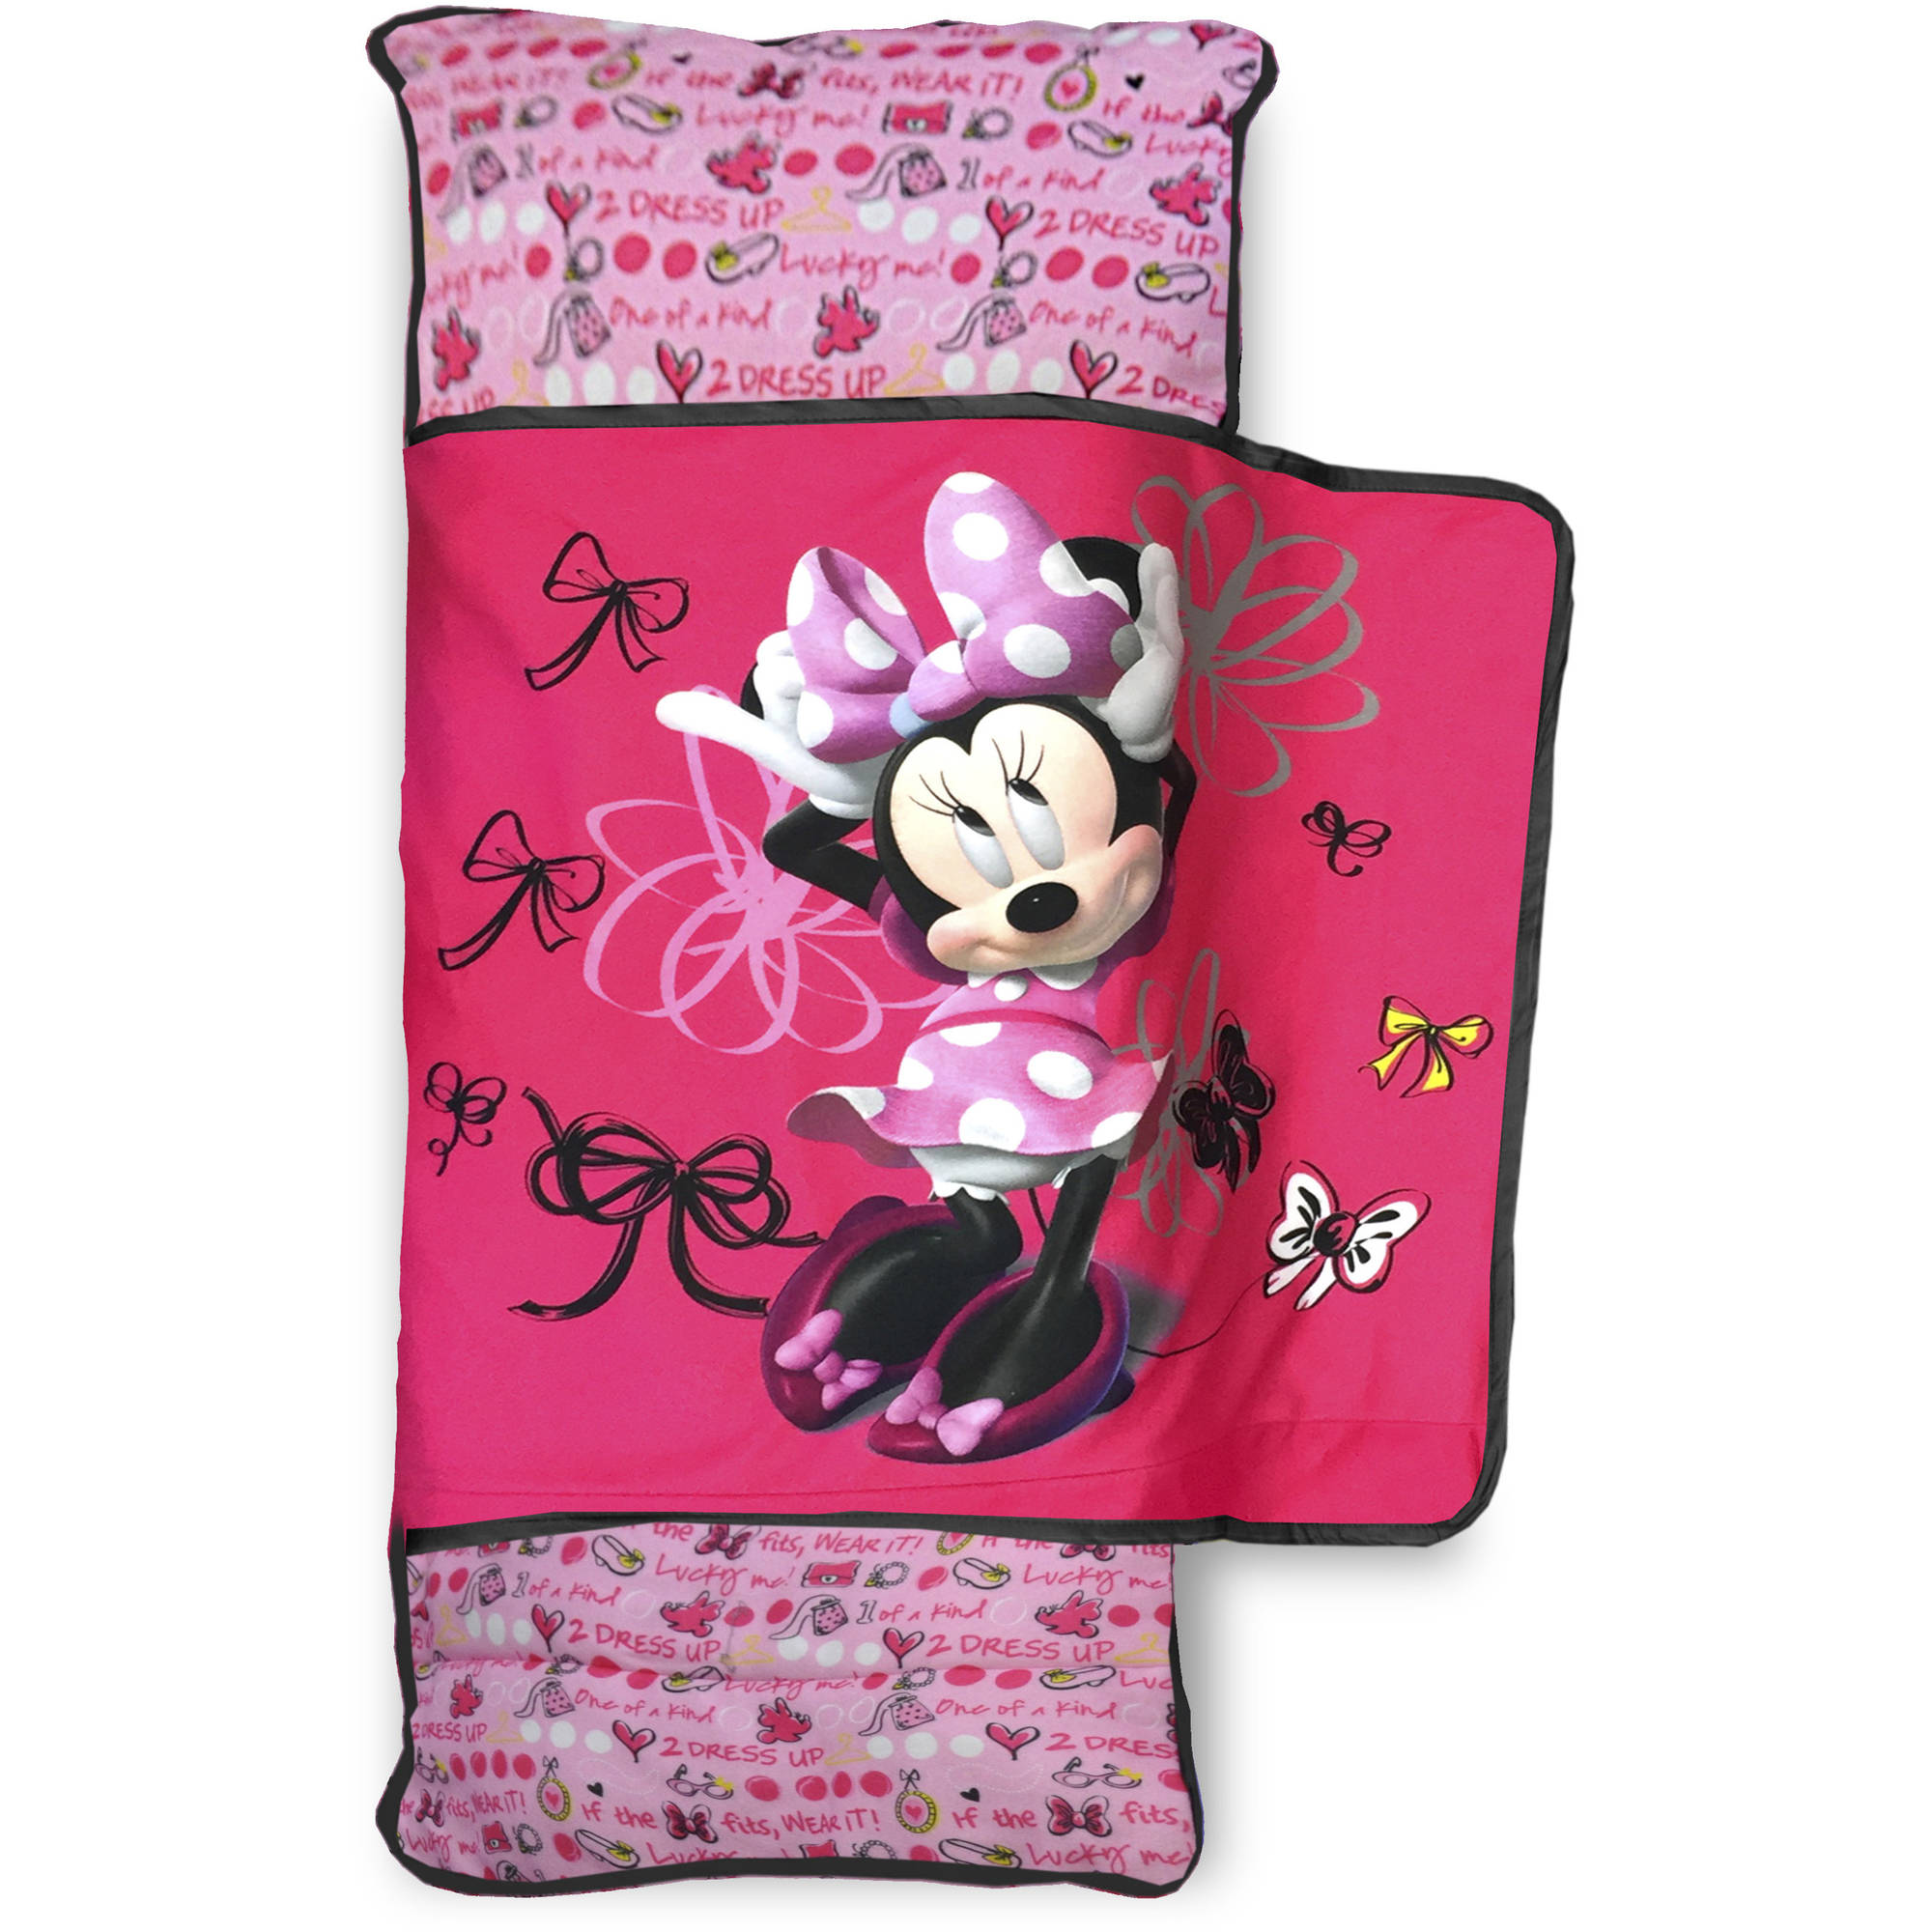 Disney Minnie Mouse Inflatable Nap Mat Available - image 1 of 2